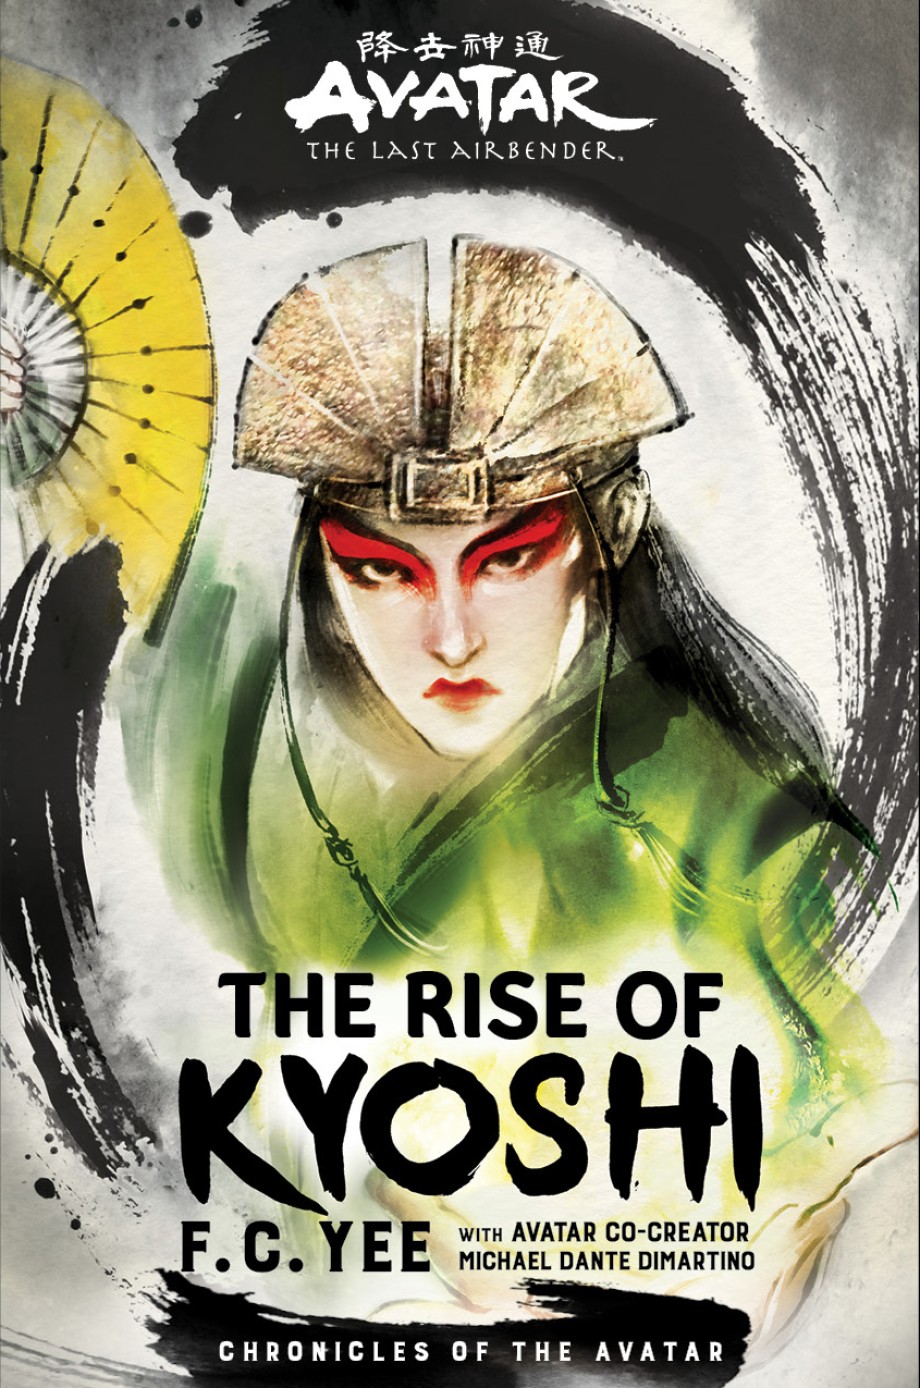 Avatar, The Last Airbender: The Rise of Kyoshi (The Kyoshi Novels Book 1) 